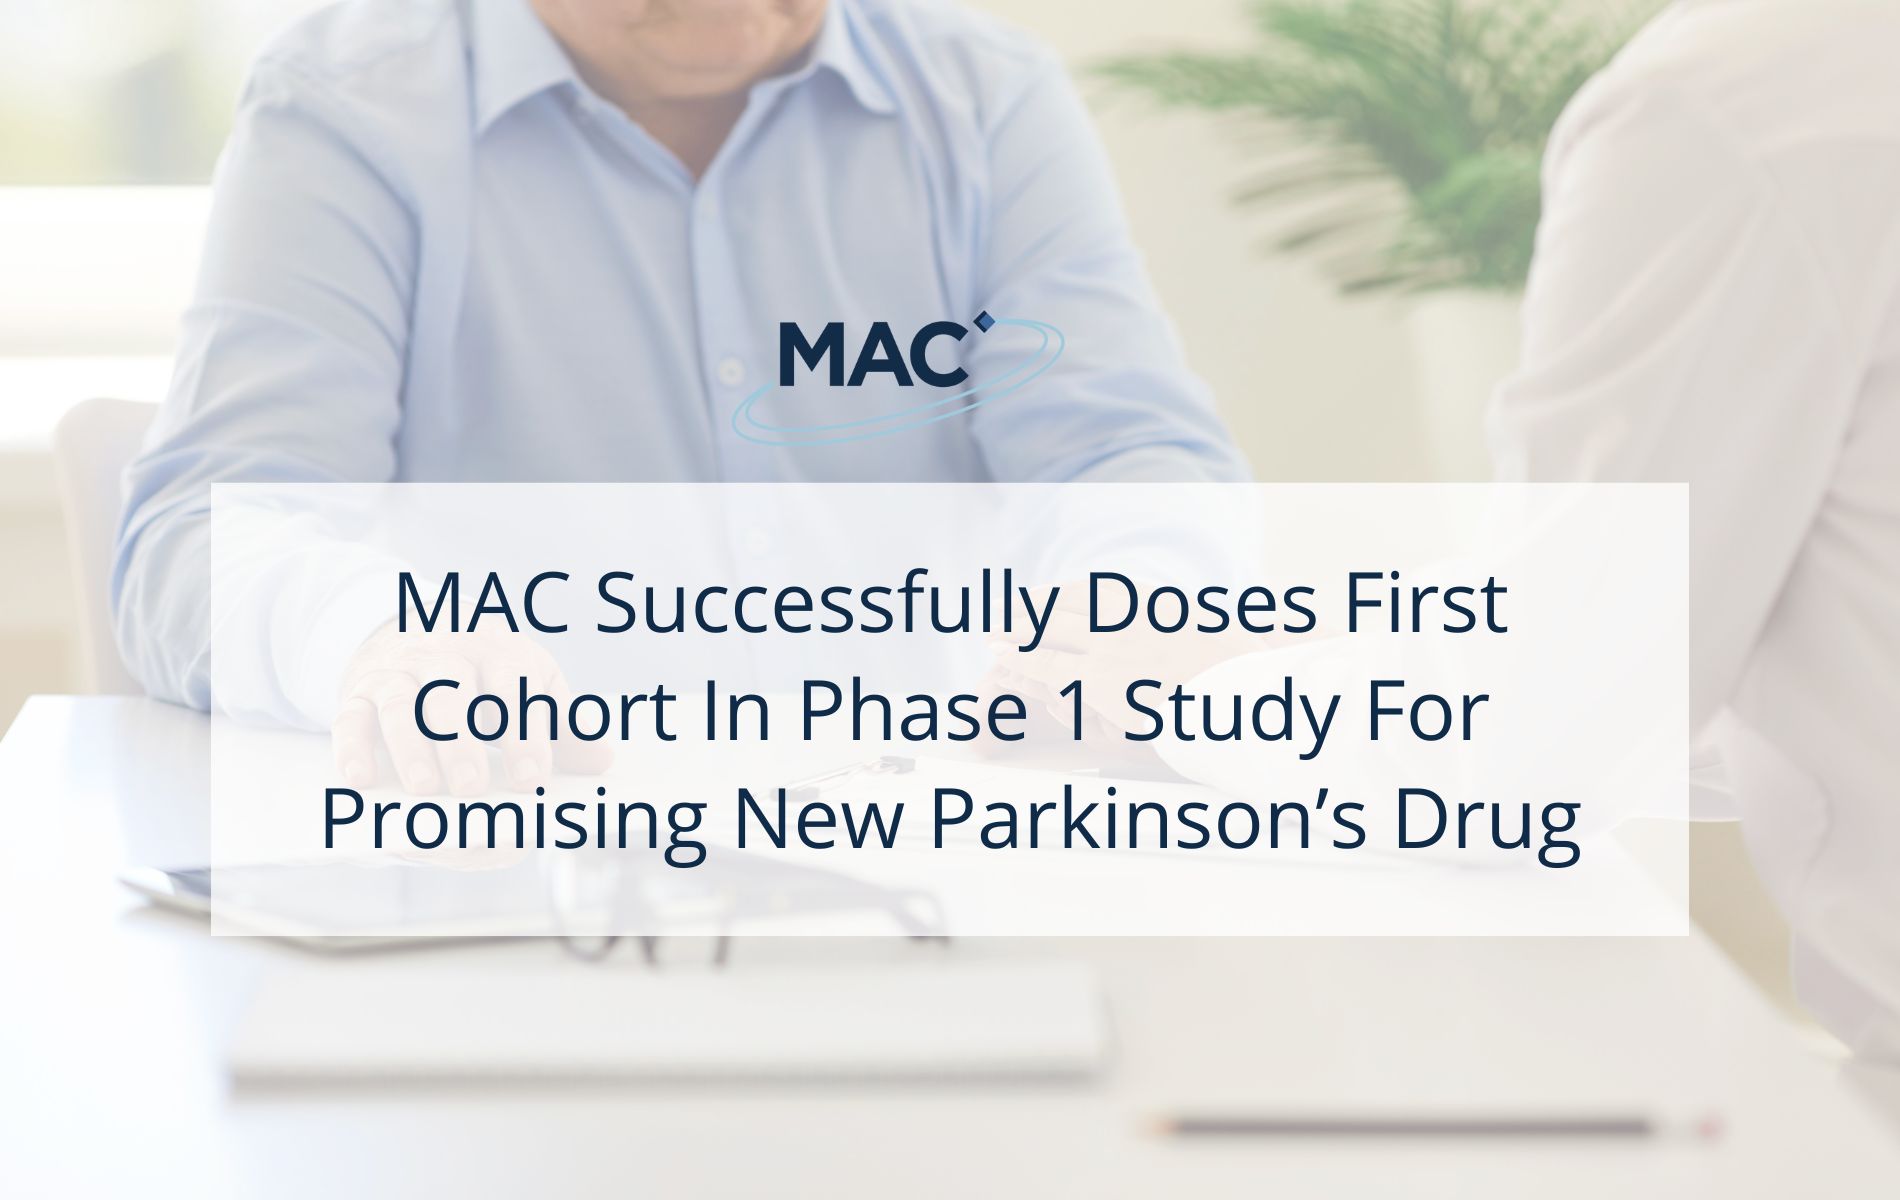 Successful dosing of first cohort in phase 1 study for Parkinson’s drug - Kariya